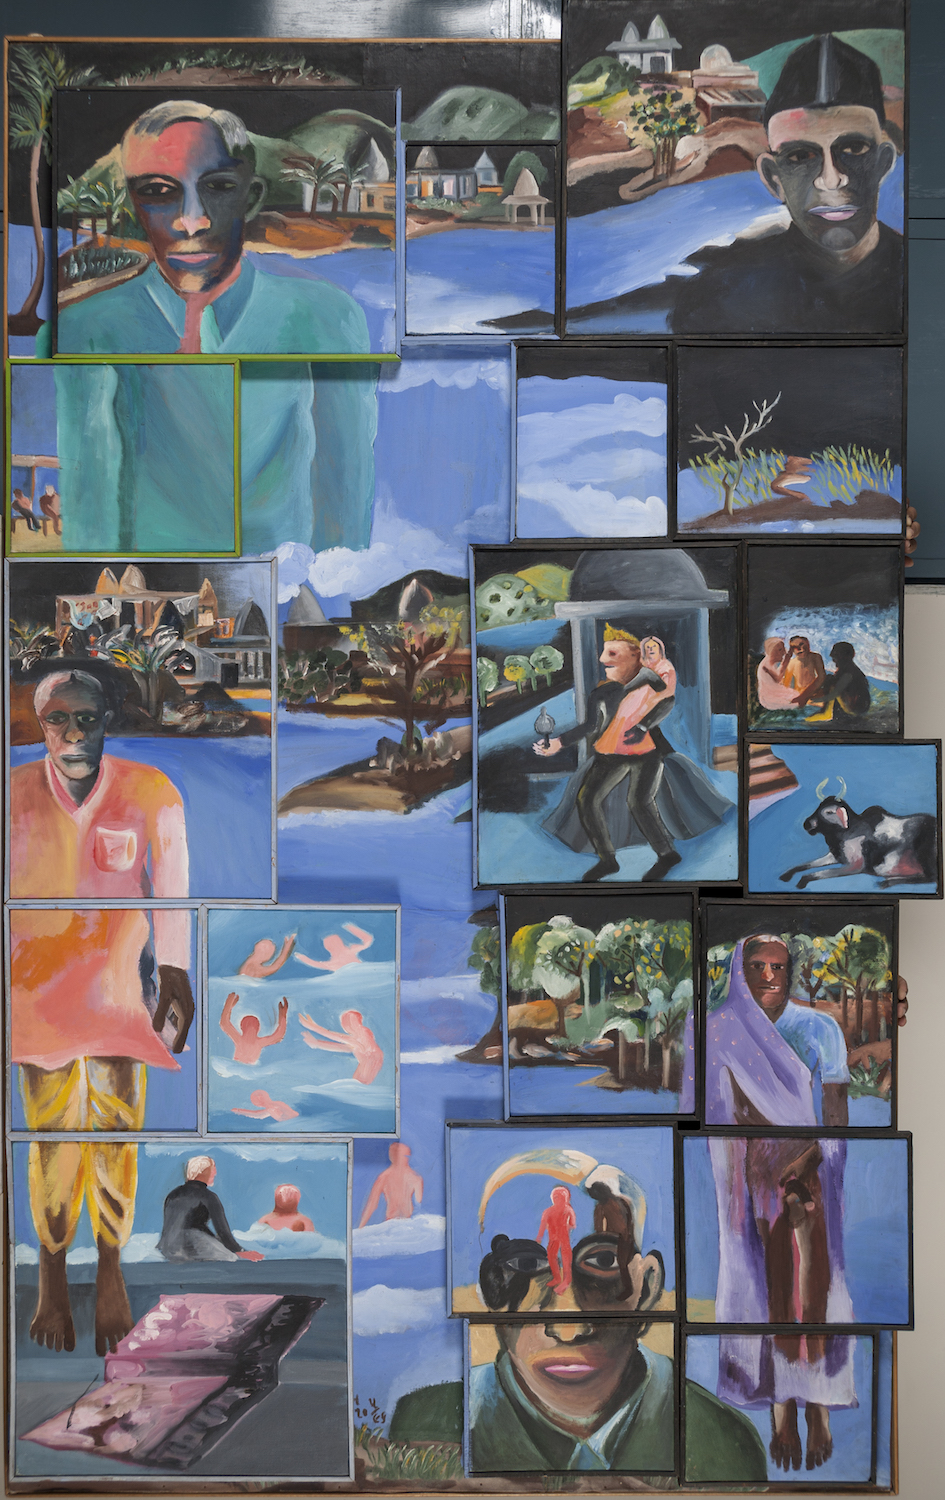  Buphen Khakhar, ‘Night’, 1996, oil paint on canvas laid on board, 205 x 129.5 cm. Image courtesy Collection of Kiran Nadar Museum of Art. 